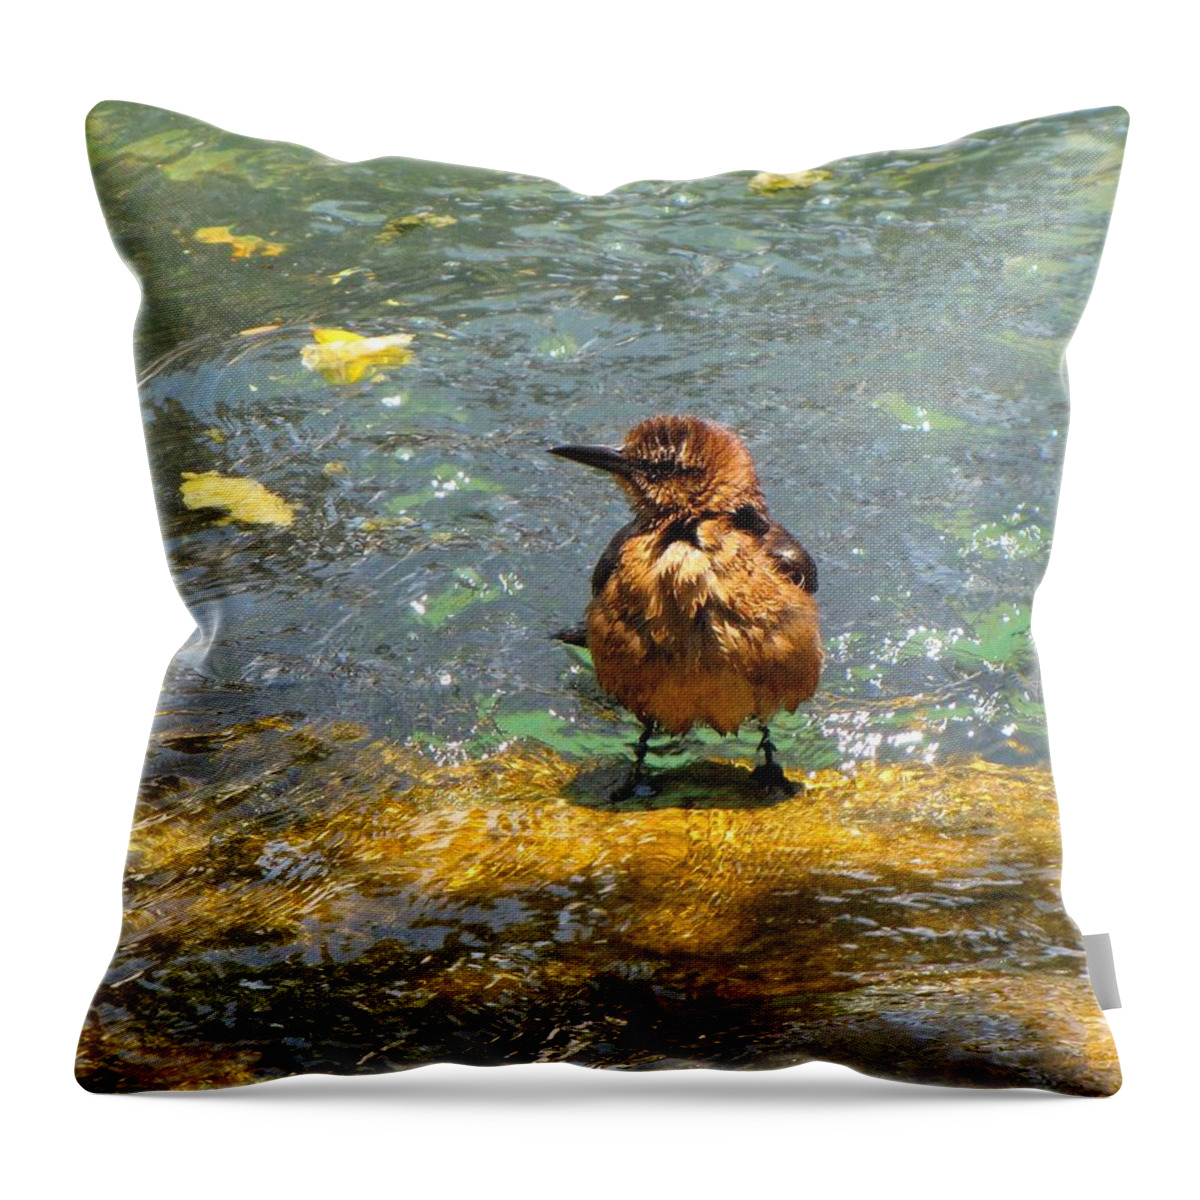 Bird Throw Pillow featuring the photograph After Bath by MTBobbins Photography